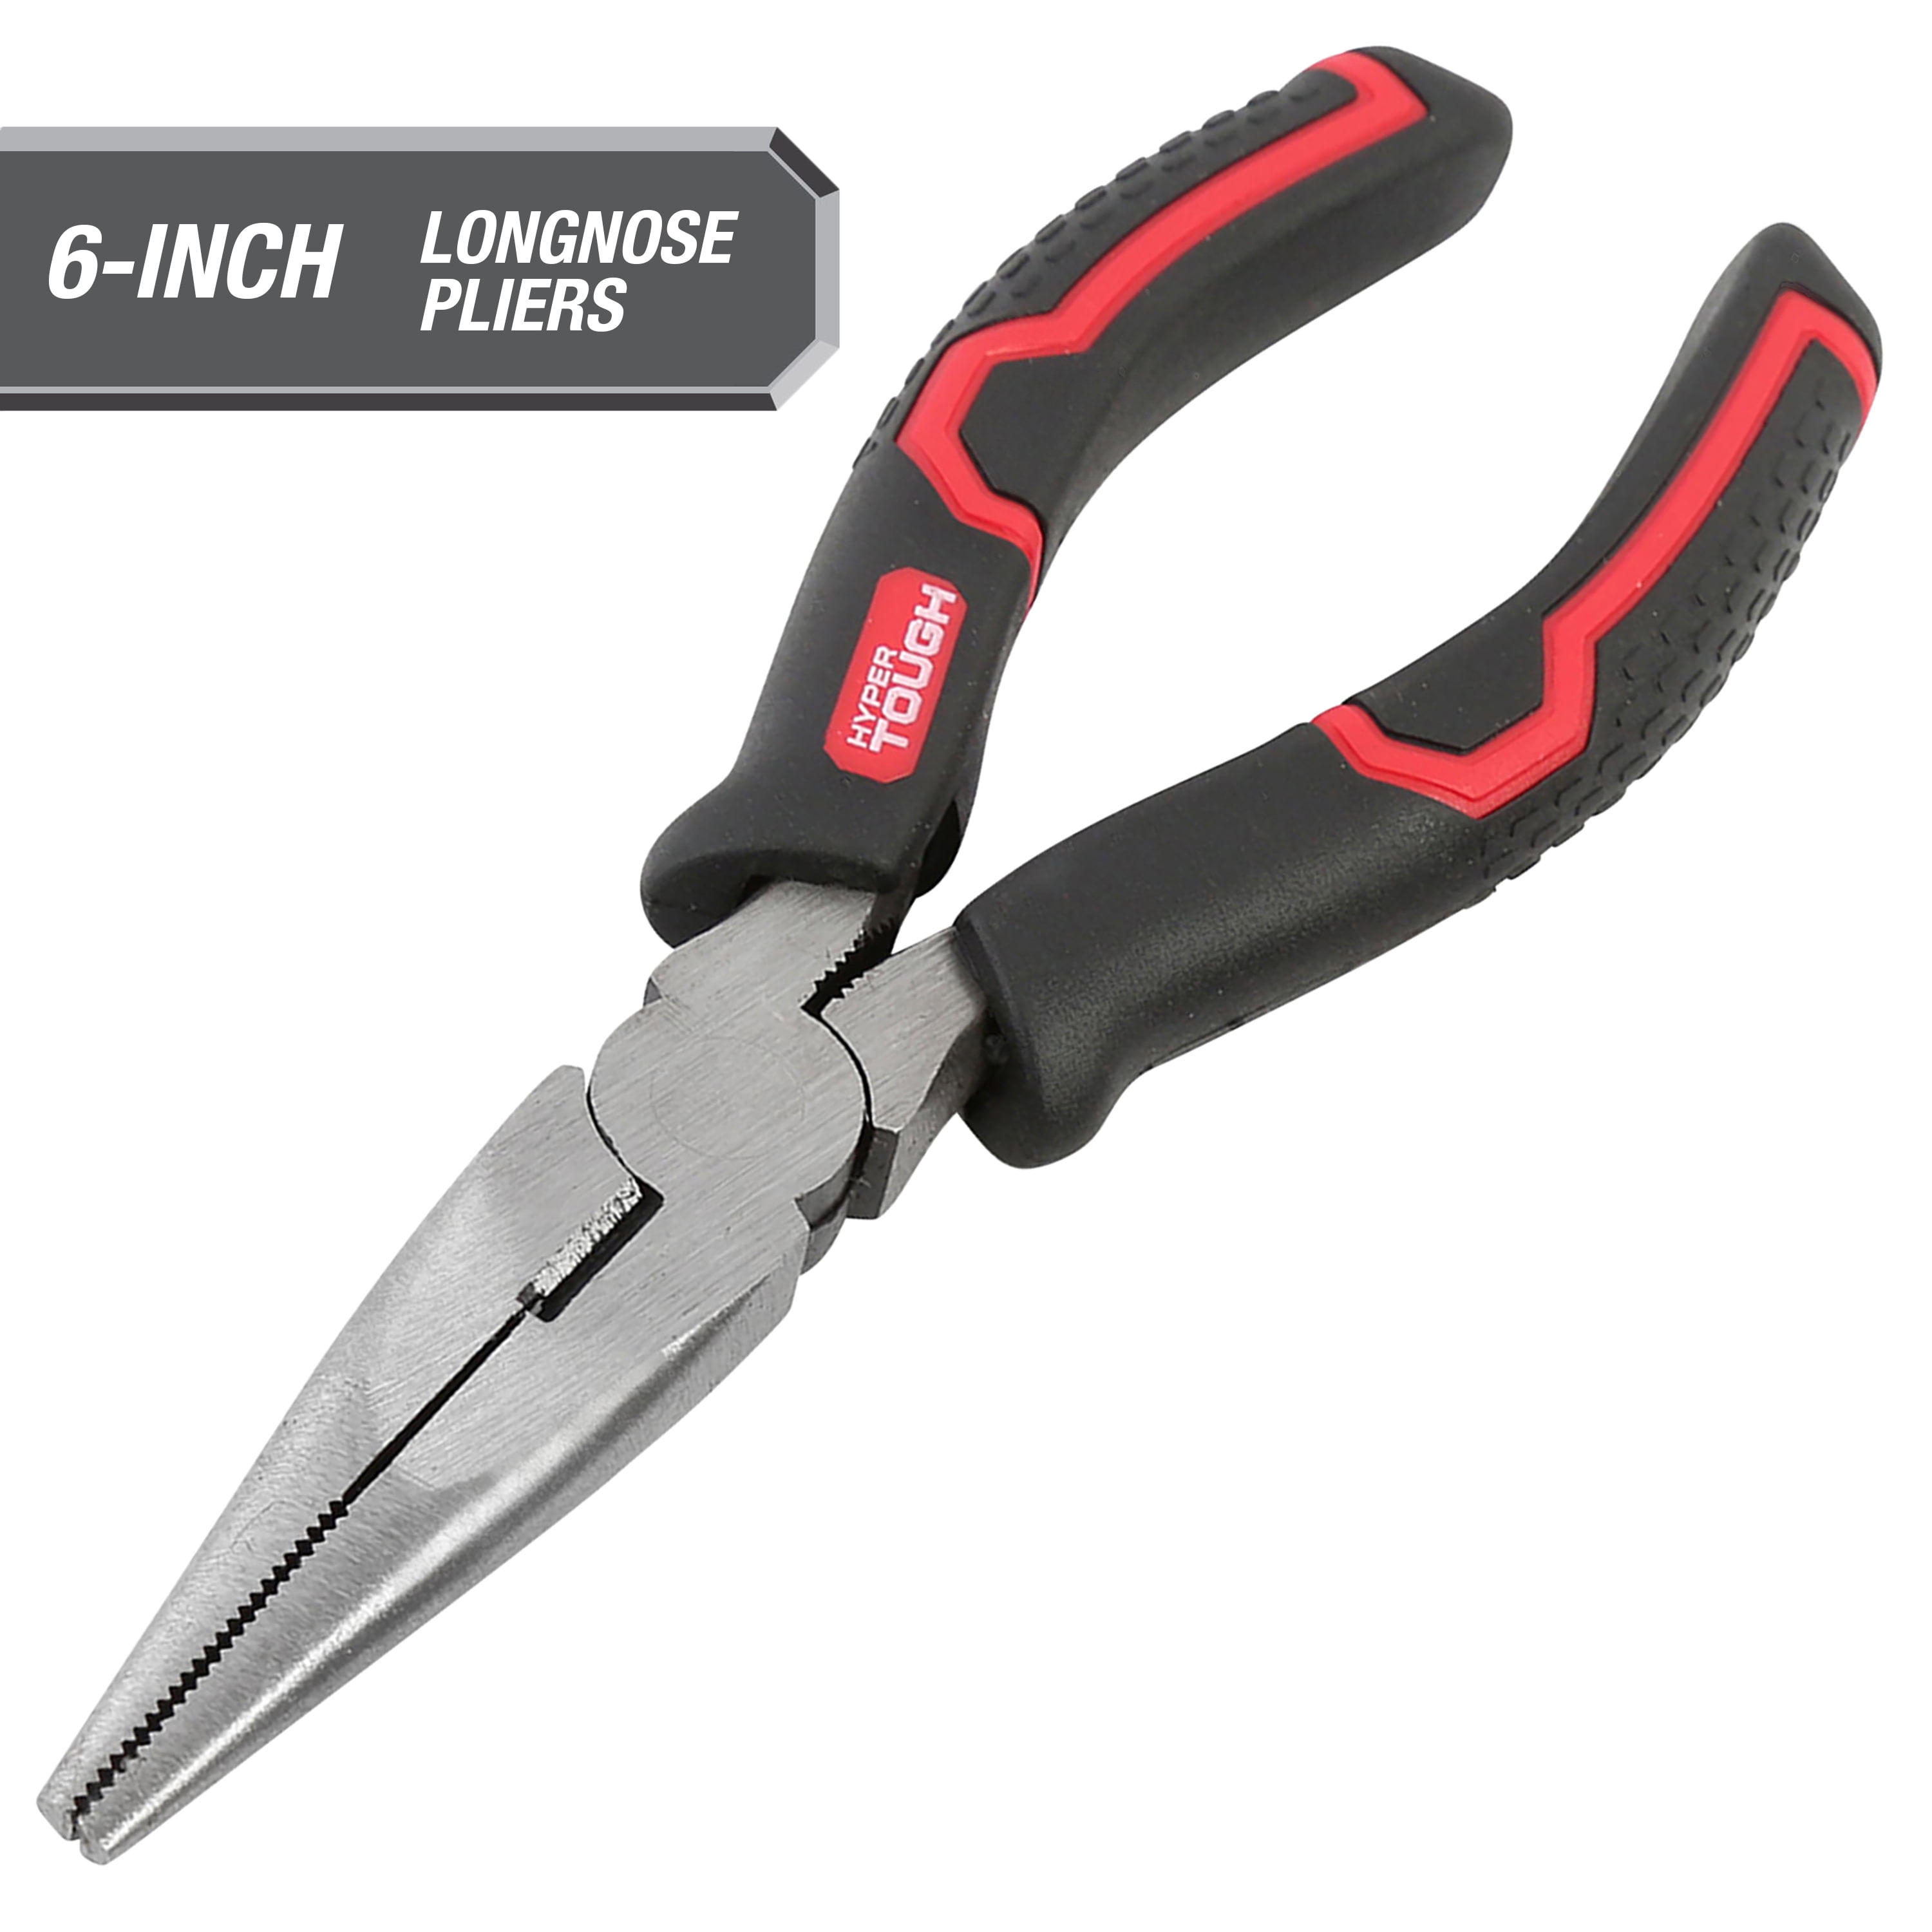 Dykes Needle Nose Pliers Extra Long Needle Nose Plier (6-Inch